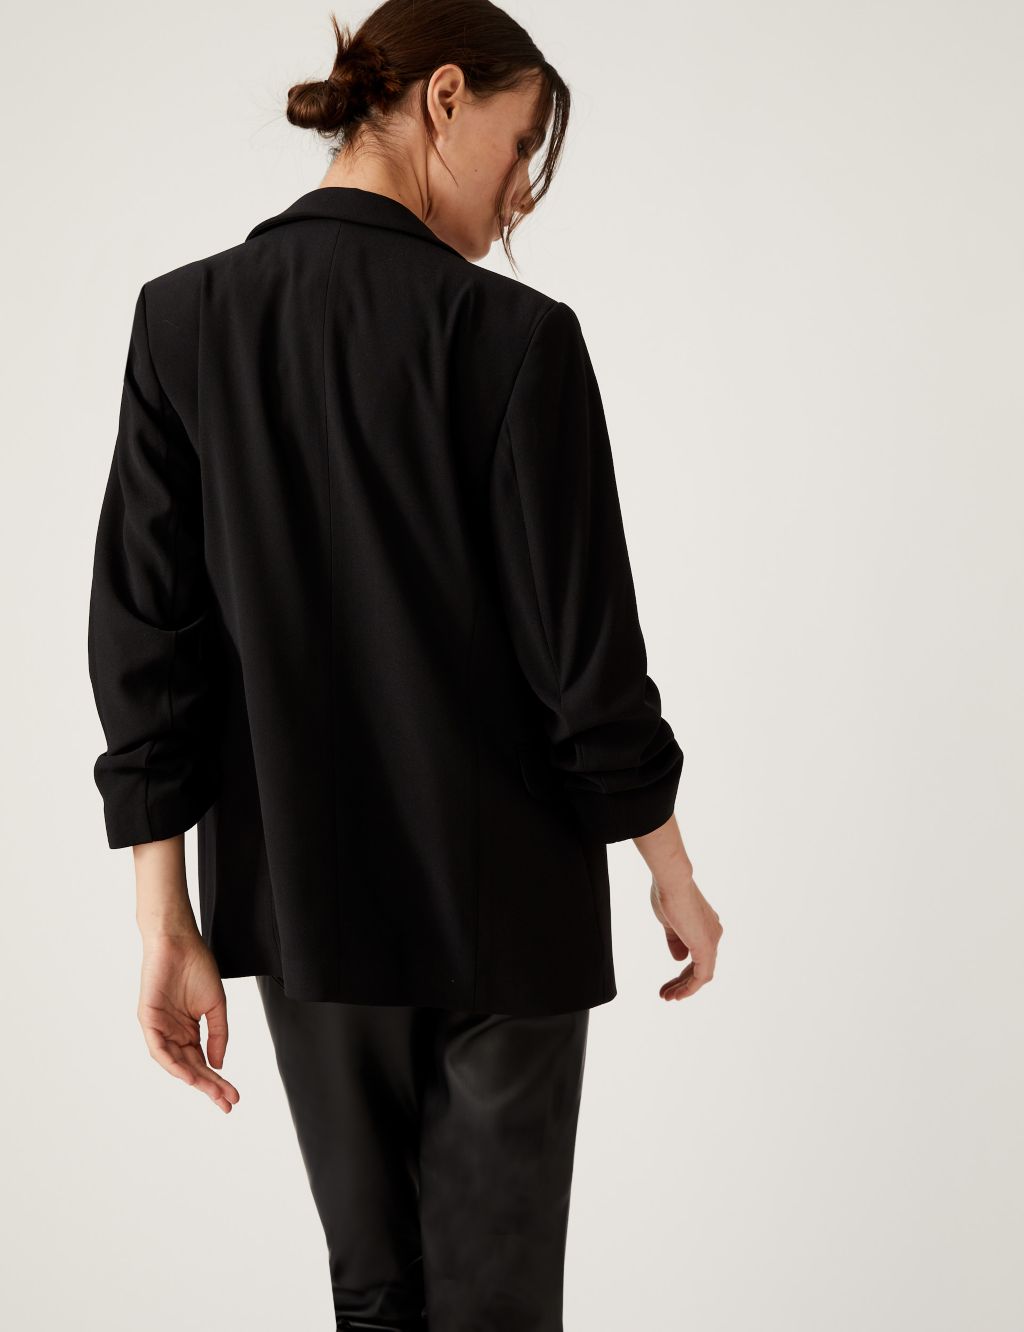 Relaxed Ruched Sleeve Blazer image 5